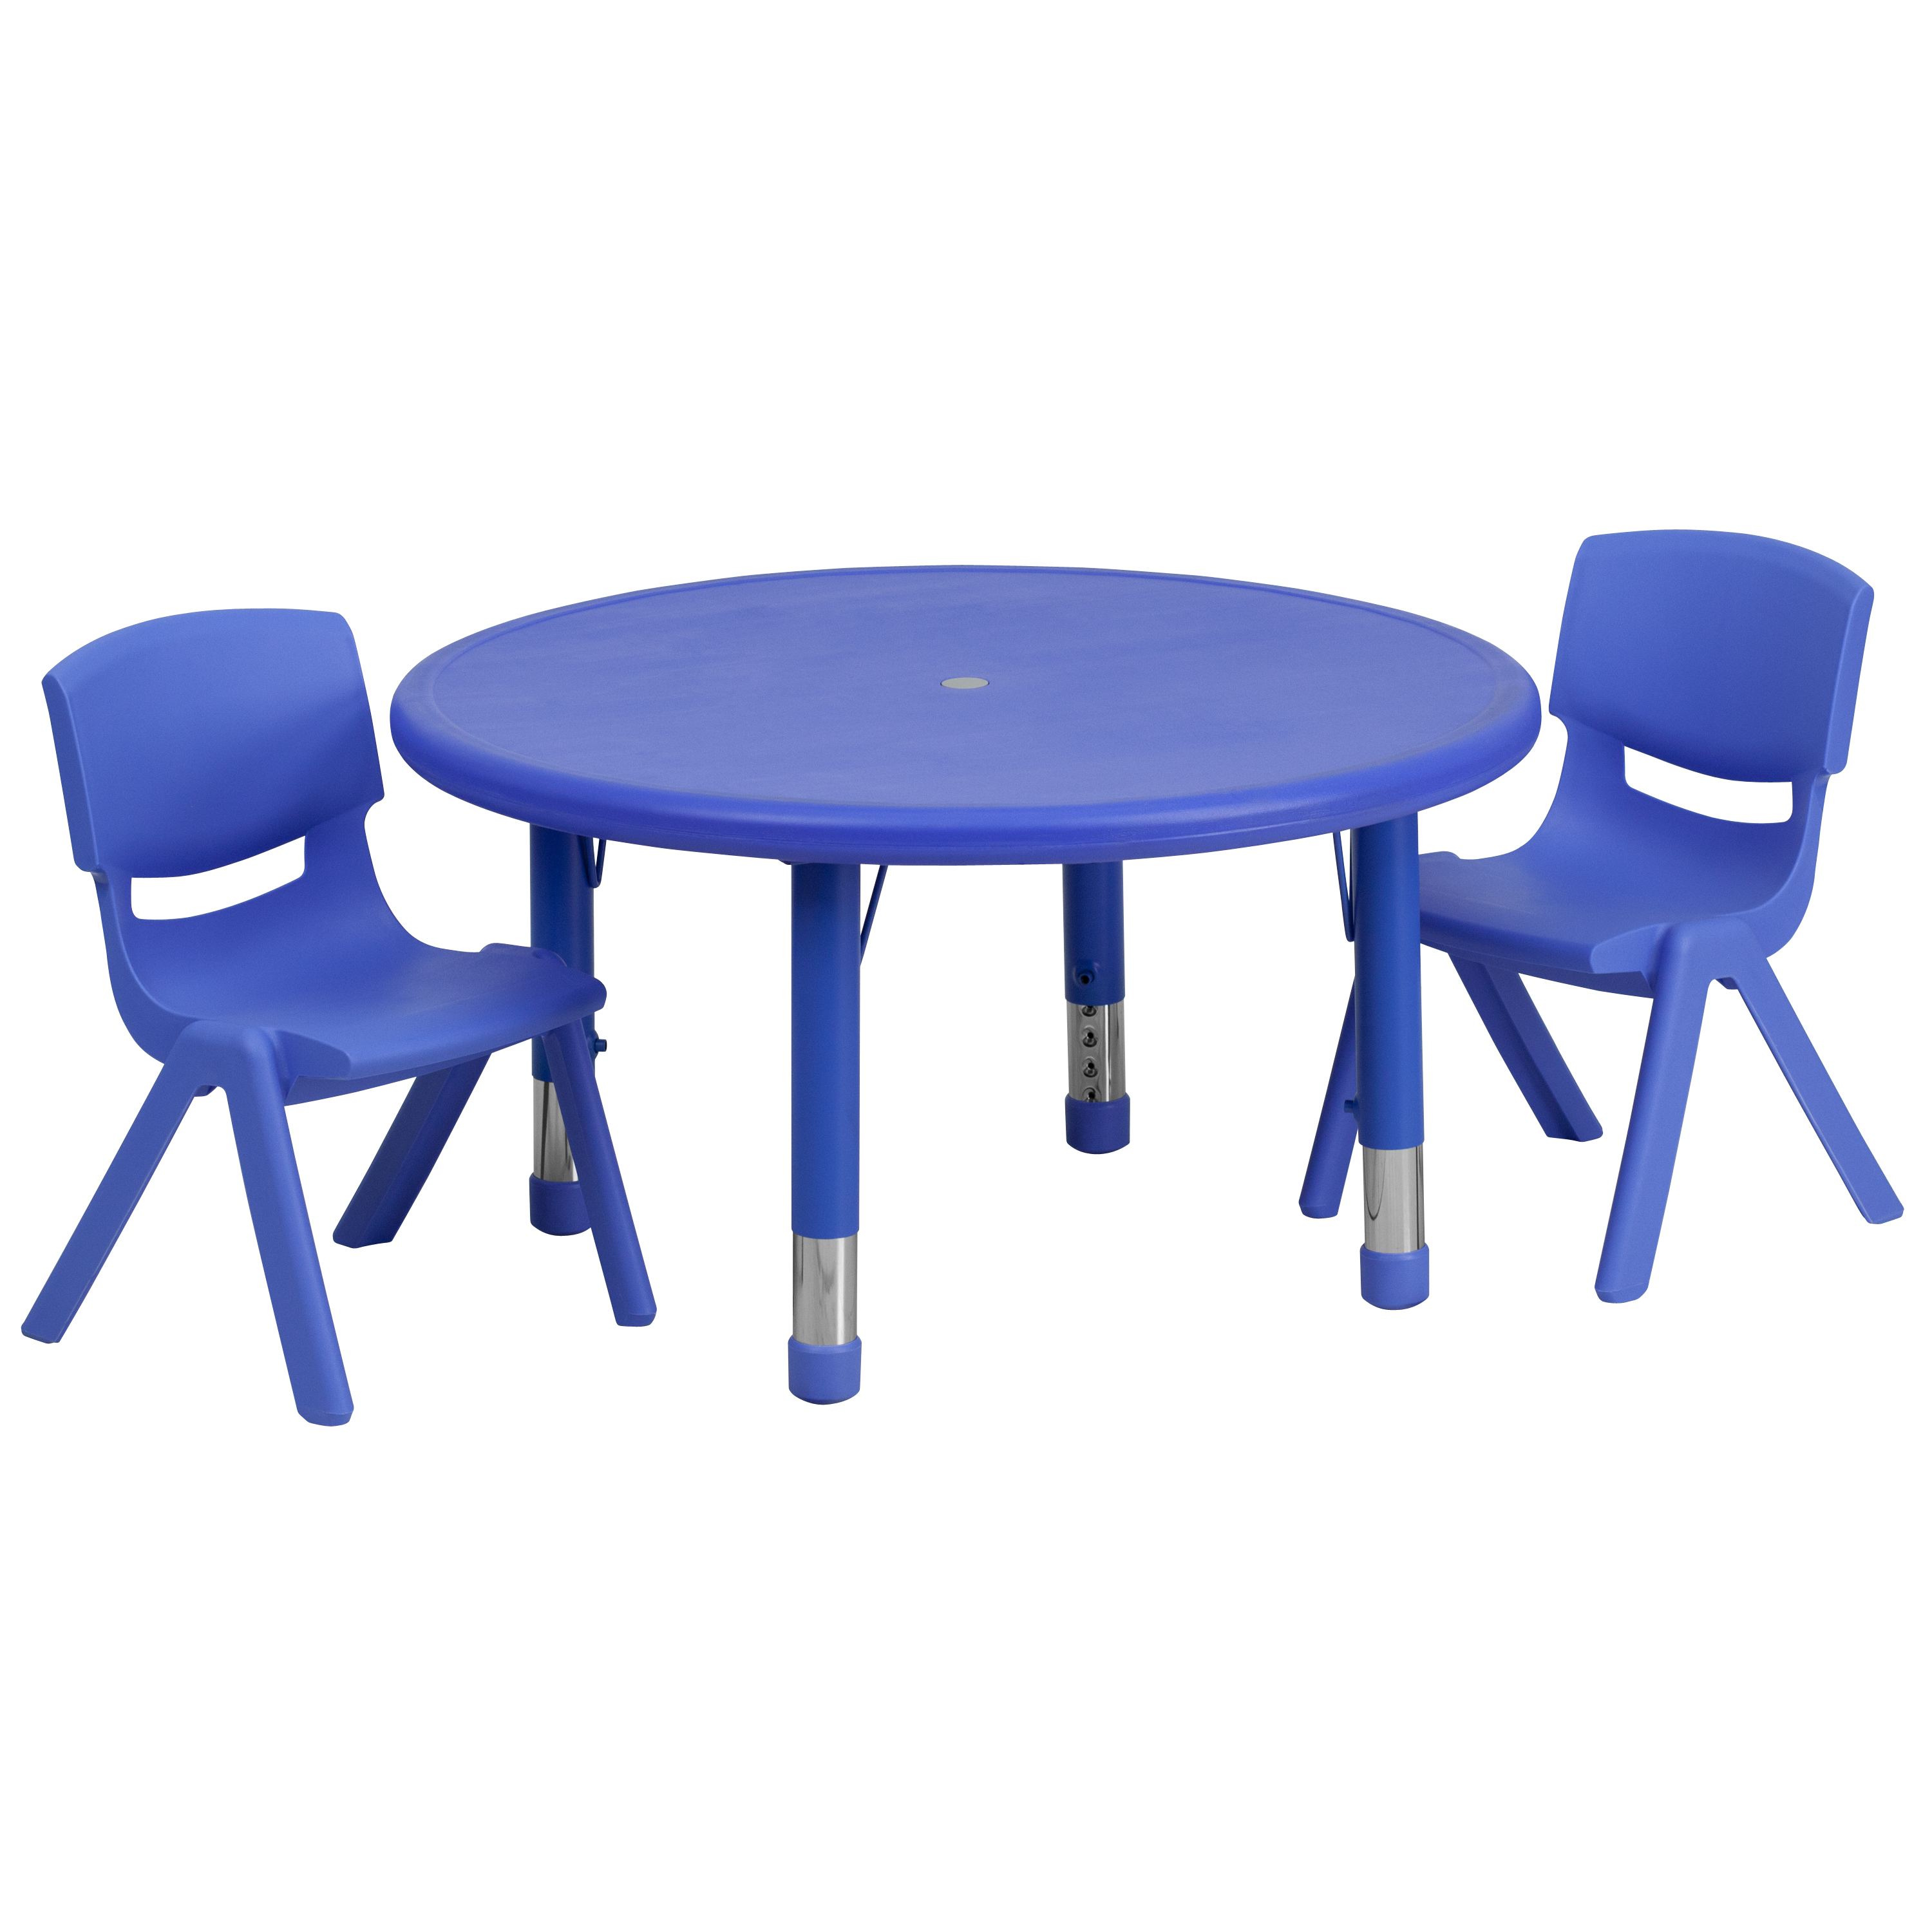 Flash Furniture 33'' Round Blue Plastic Height Adjustable Activity Table Set with 2 Chairs - image 1 of 3